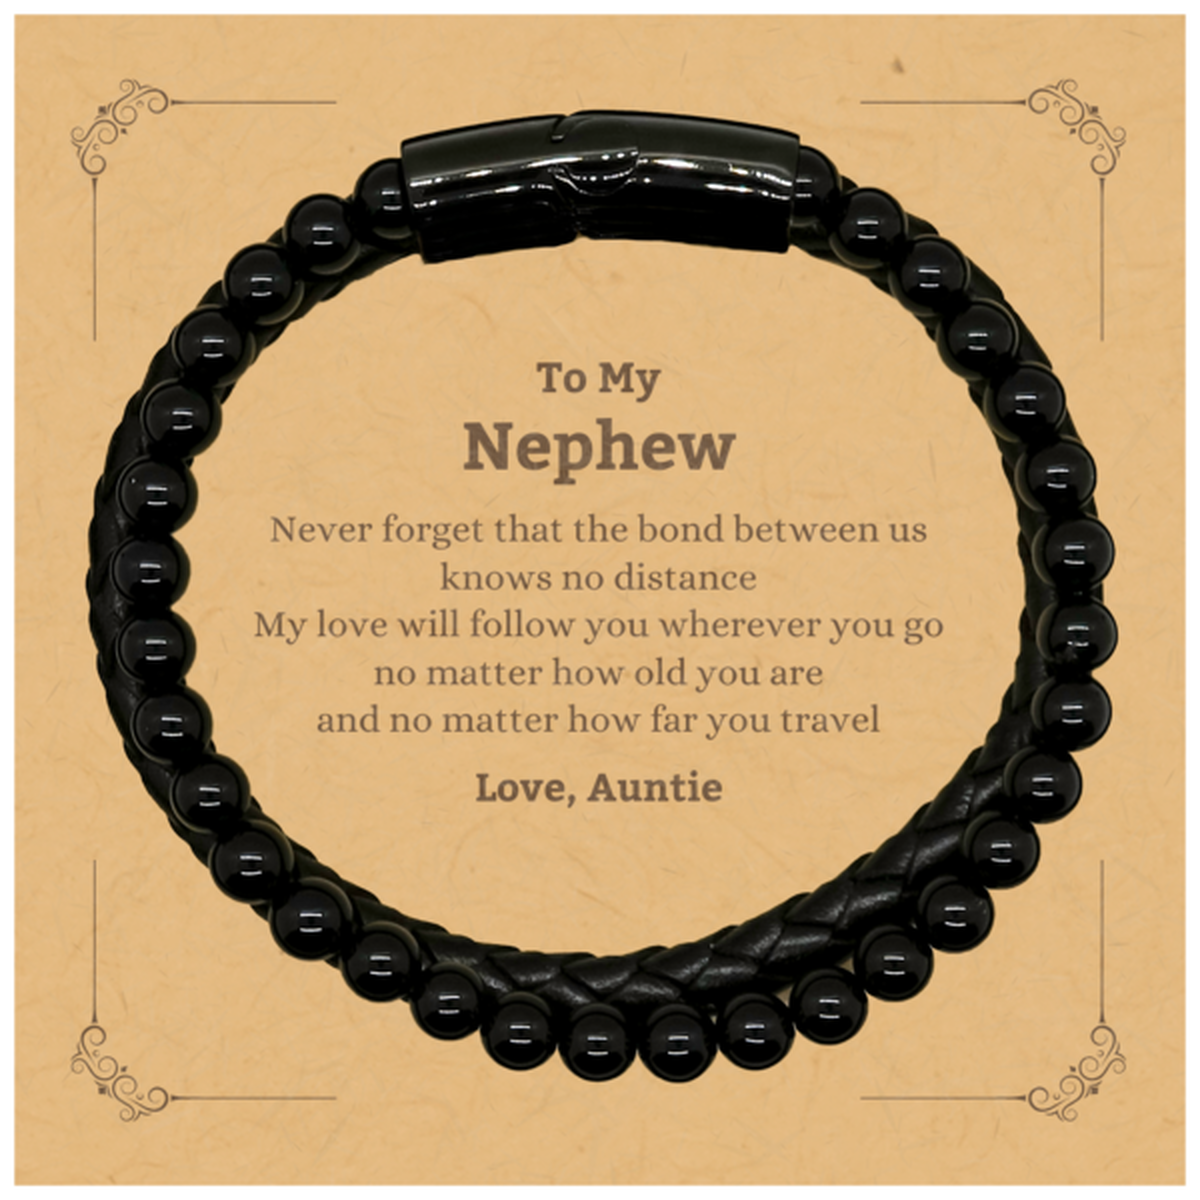 Nephew Birthday Gifts from Auntie, Adjustable Stone Leather Bracelets for Nephew Christmas Graduation Unique Gifts Nephew Never forget that the bond between us knows no distance. Love, Auntie